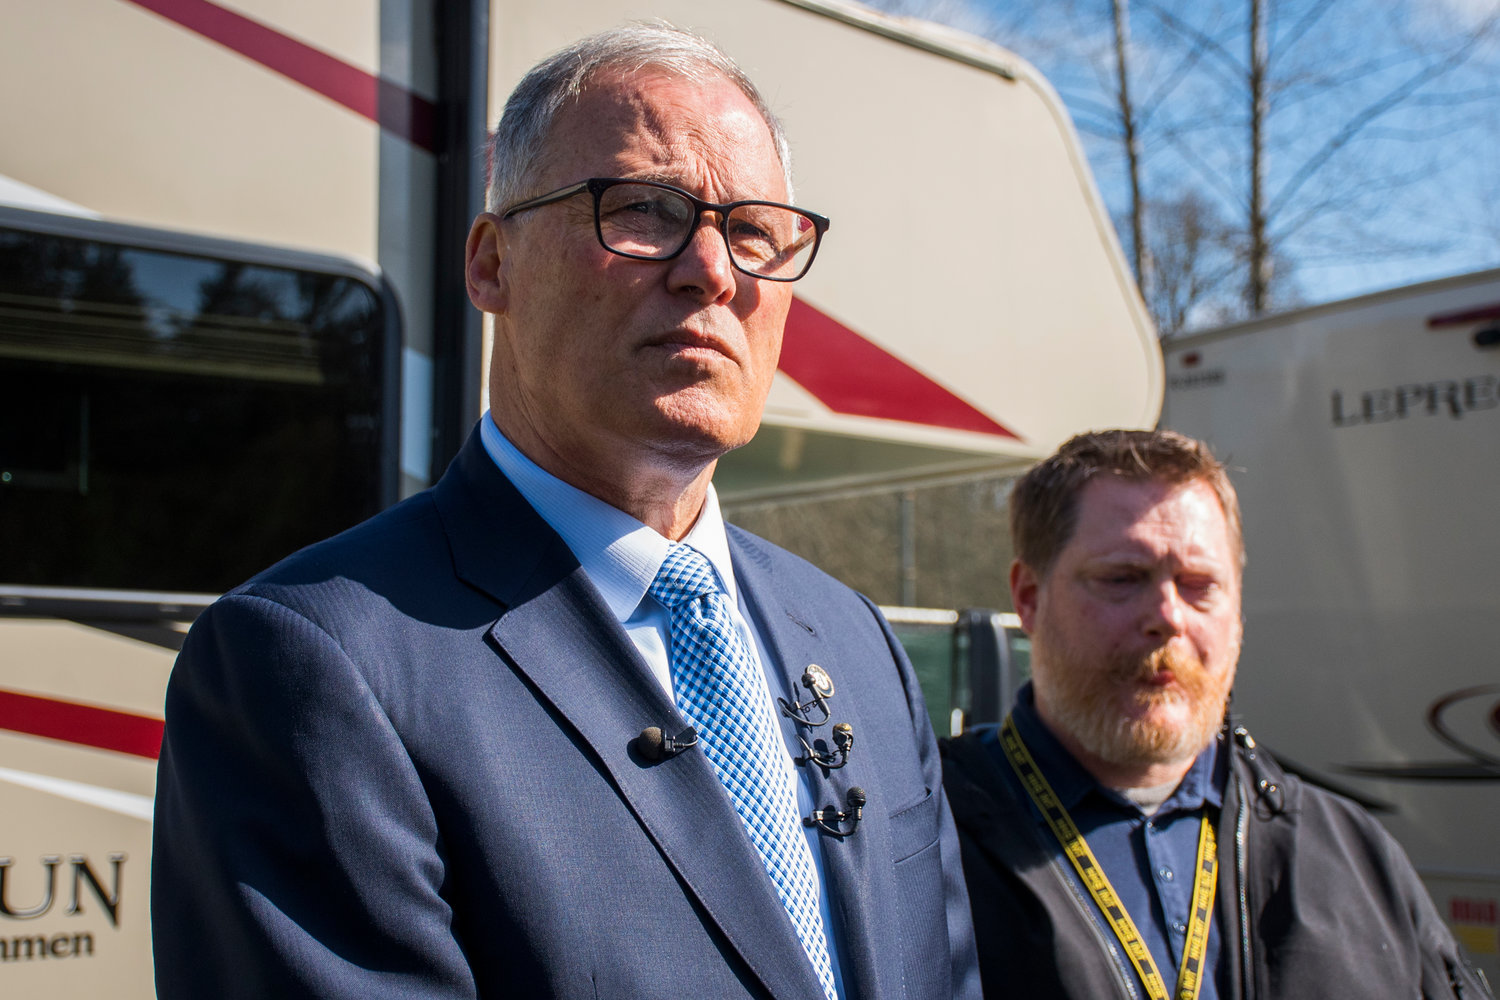 Gov. Jay Inslee, left, takes a tour with Incident Commander for the Washington State Department of Health, Nathan Weed, right, of a potential COVID-19 quarantine and isolation site at Maple Lane in March 2020.